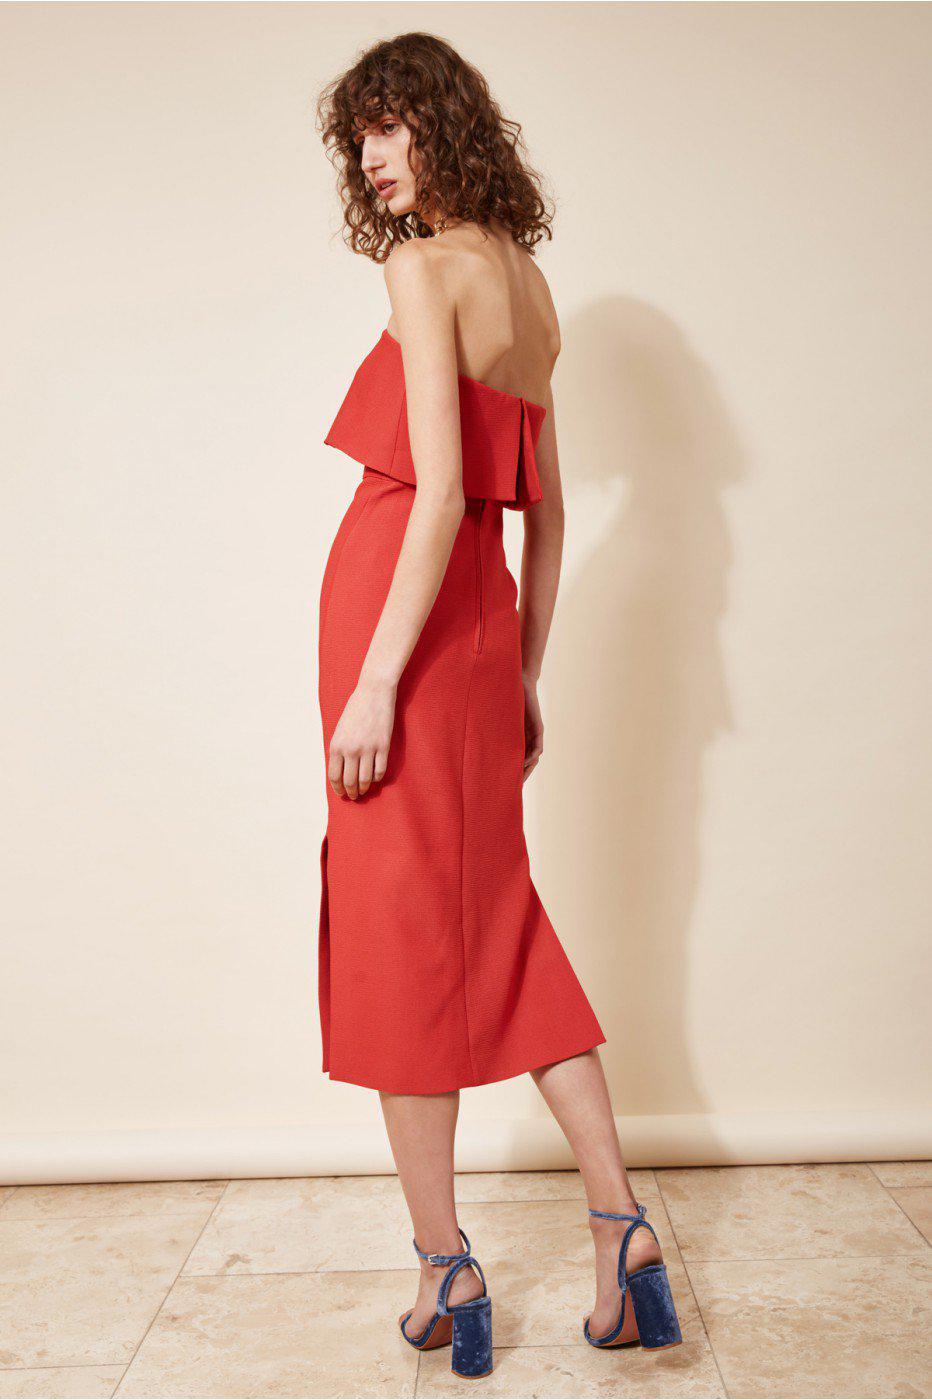 Lyst - C/Meo Collective Infinite Strapless Dress in Red